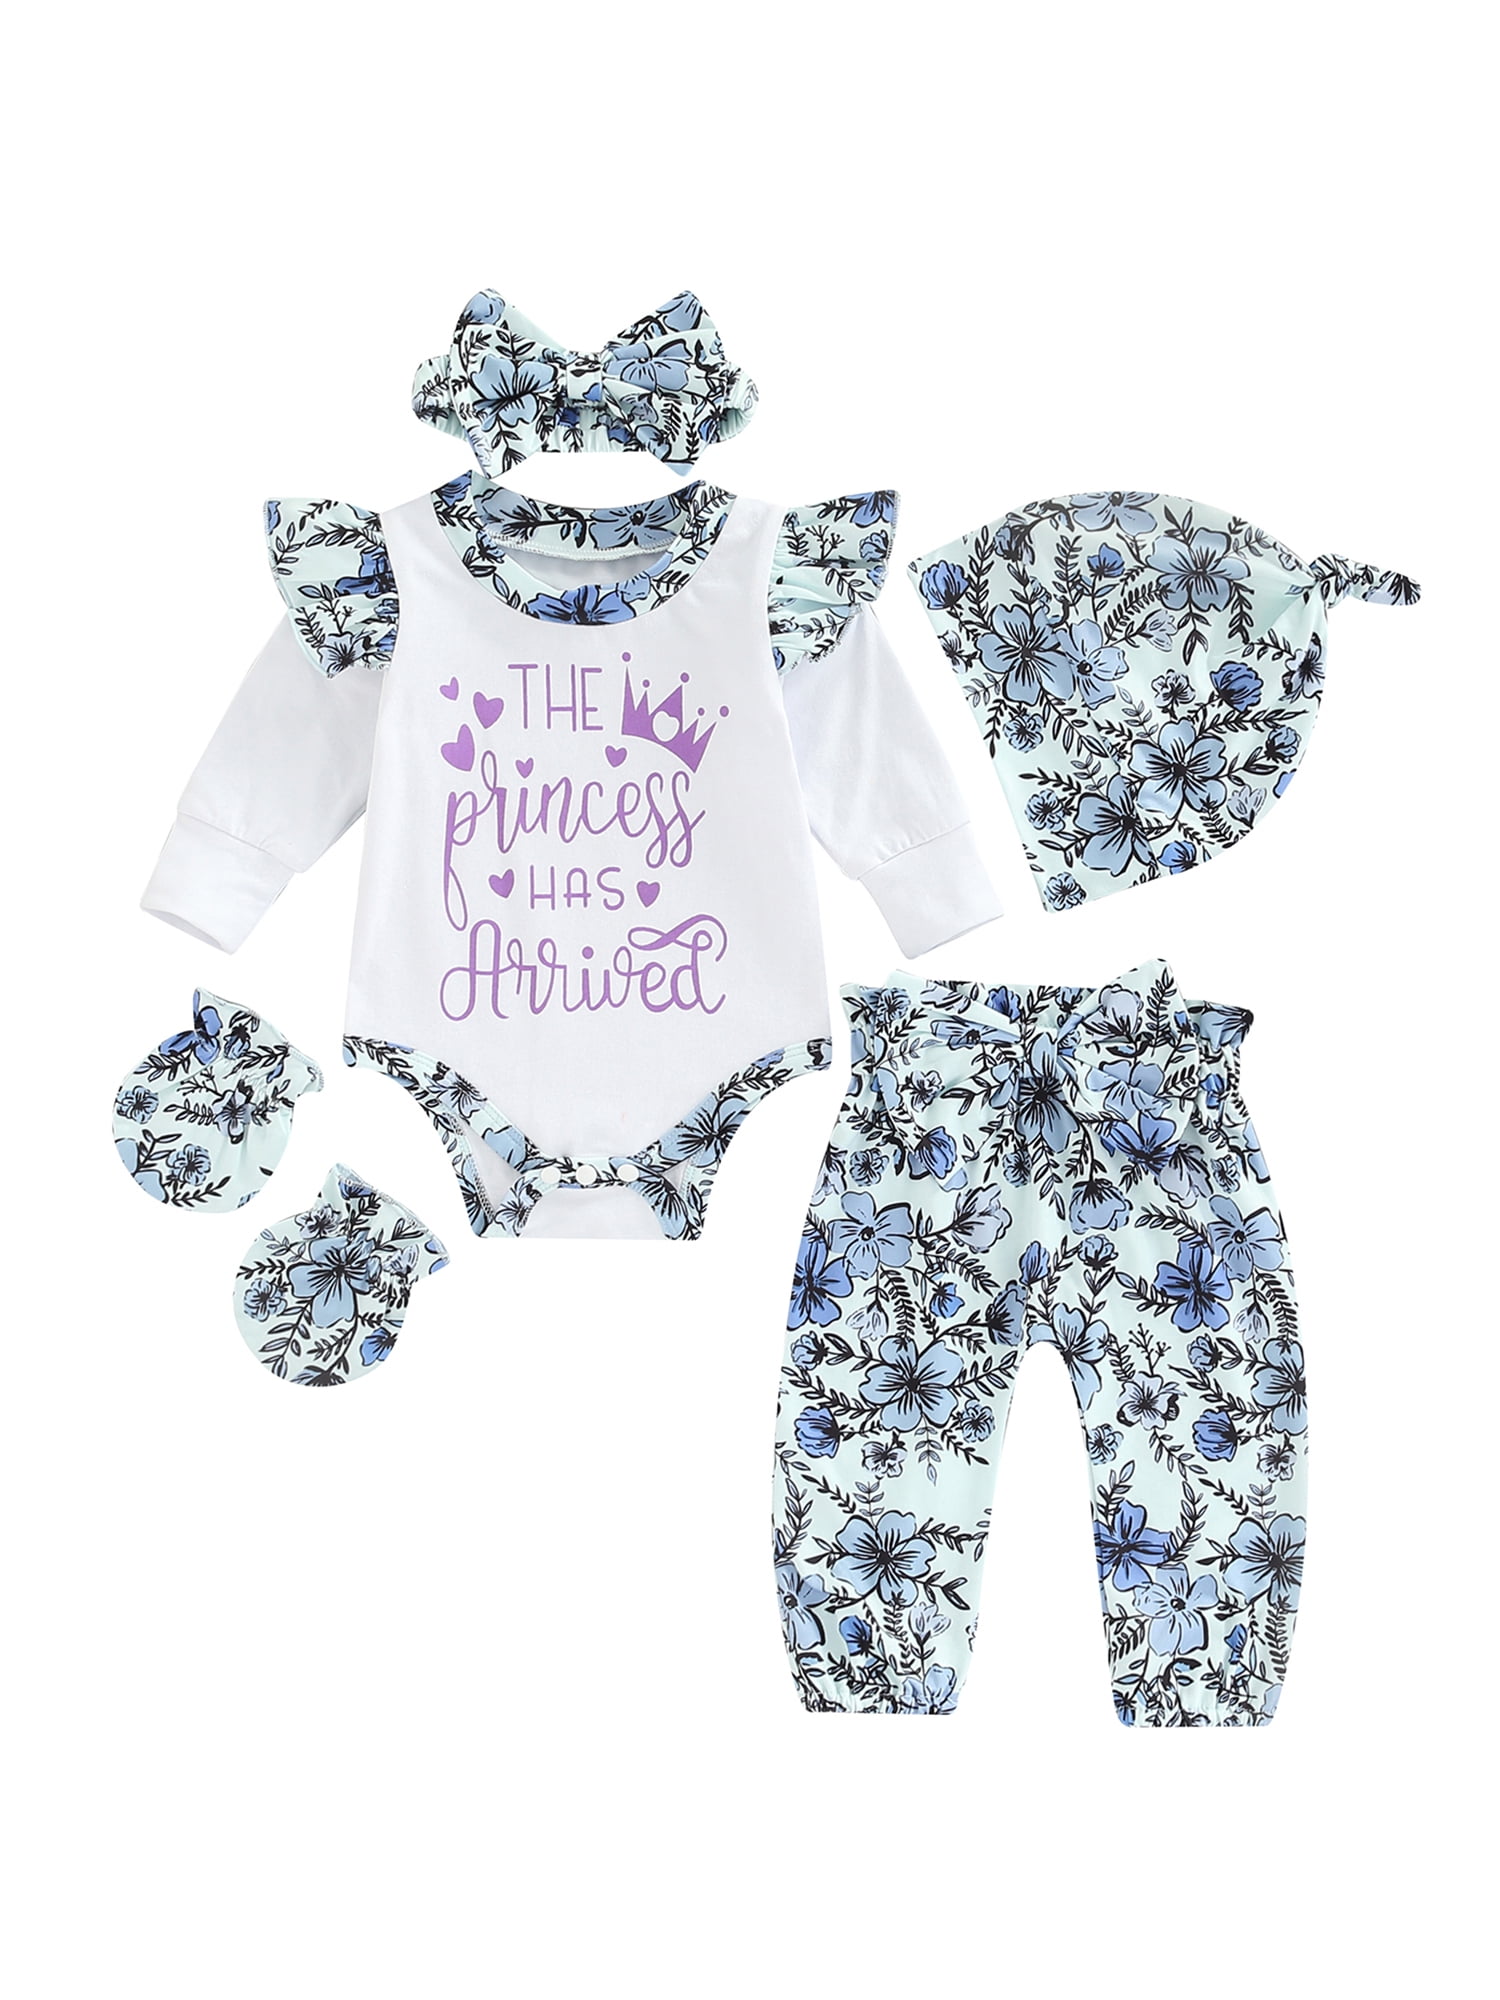 Newborn Baby Girl Outfits Letter Print Long Sleeve Romper+Floral Pants+Hat+Headband+Gloves 5PCS Clothes Set 